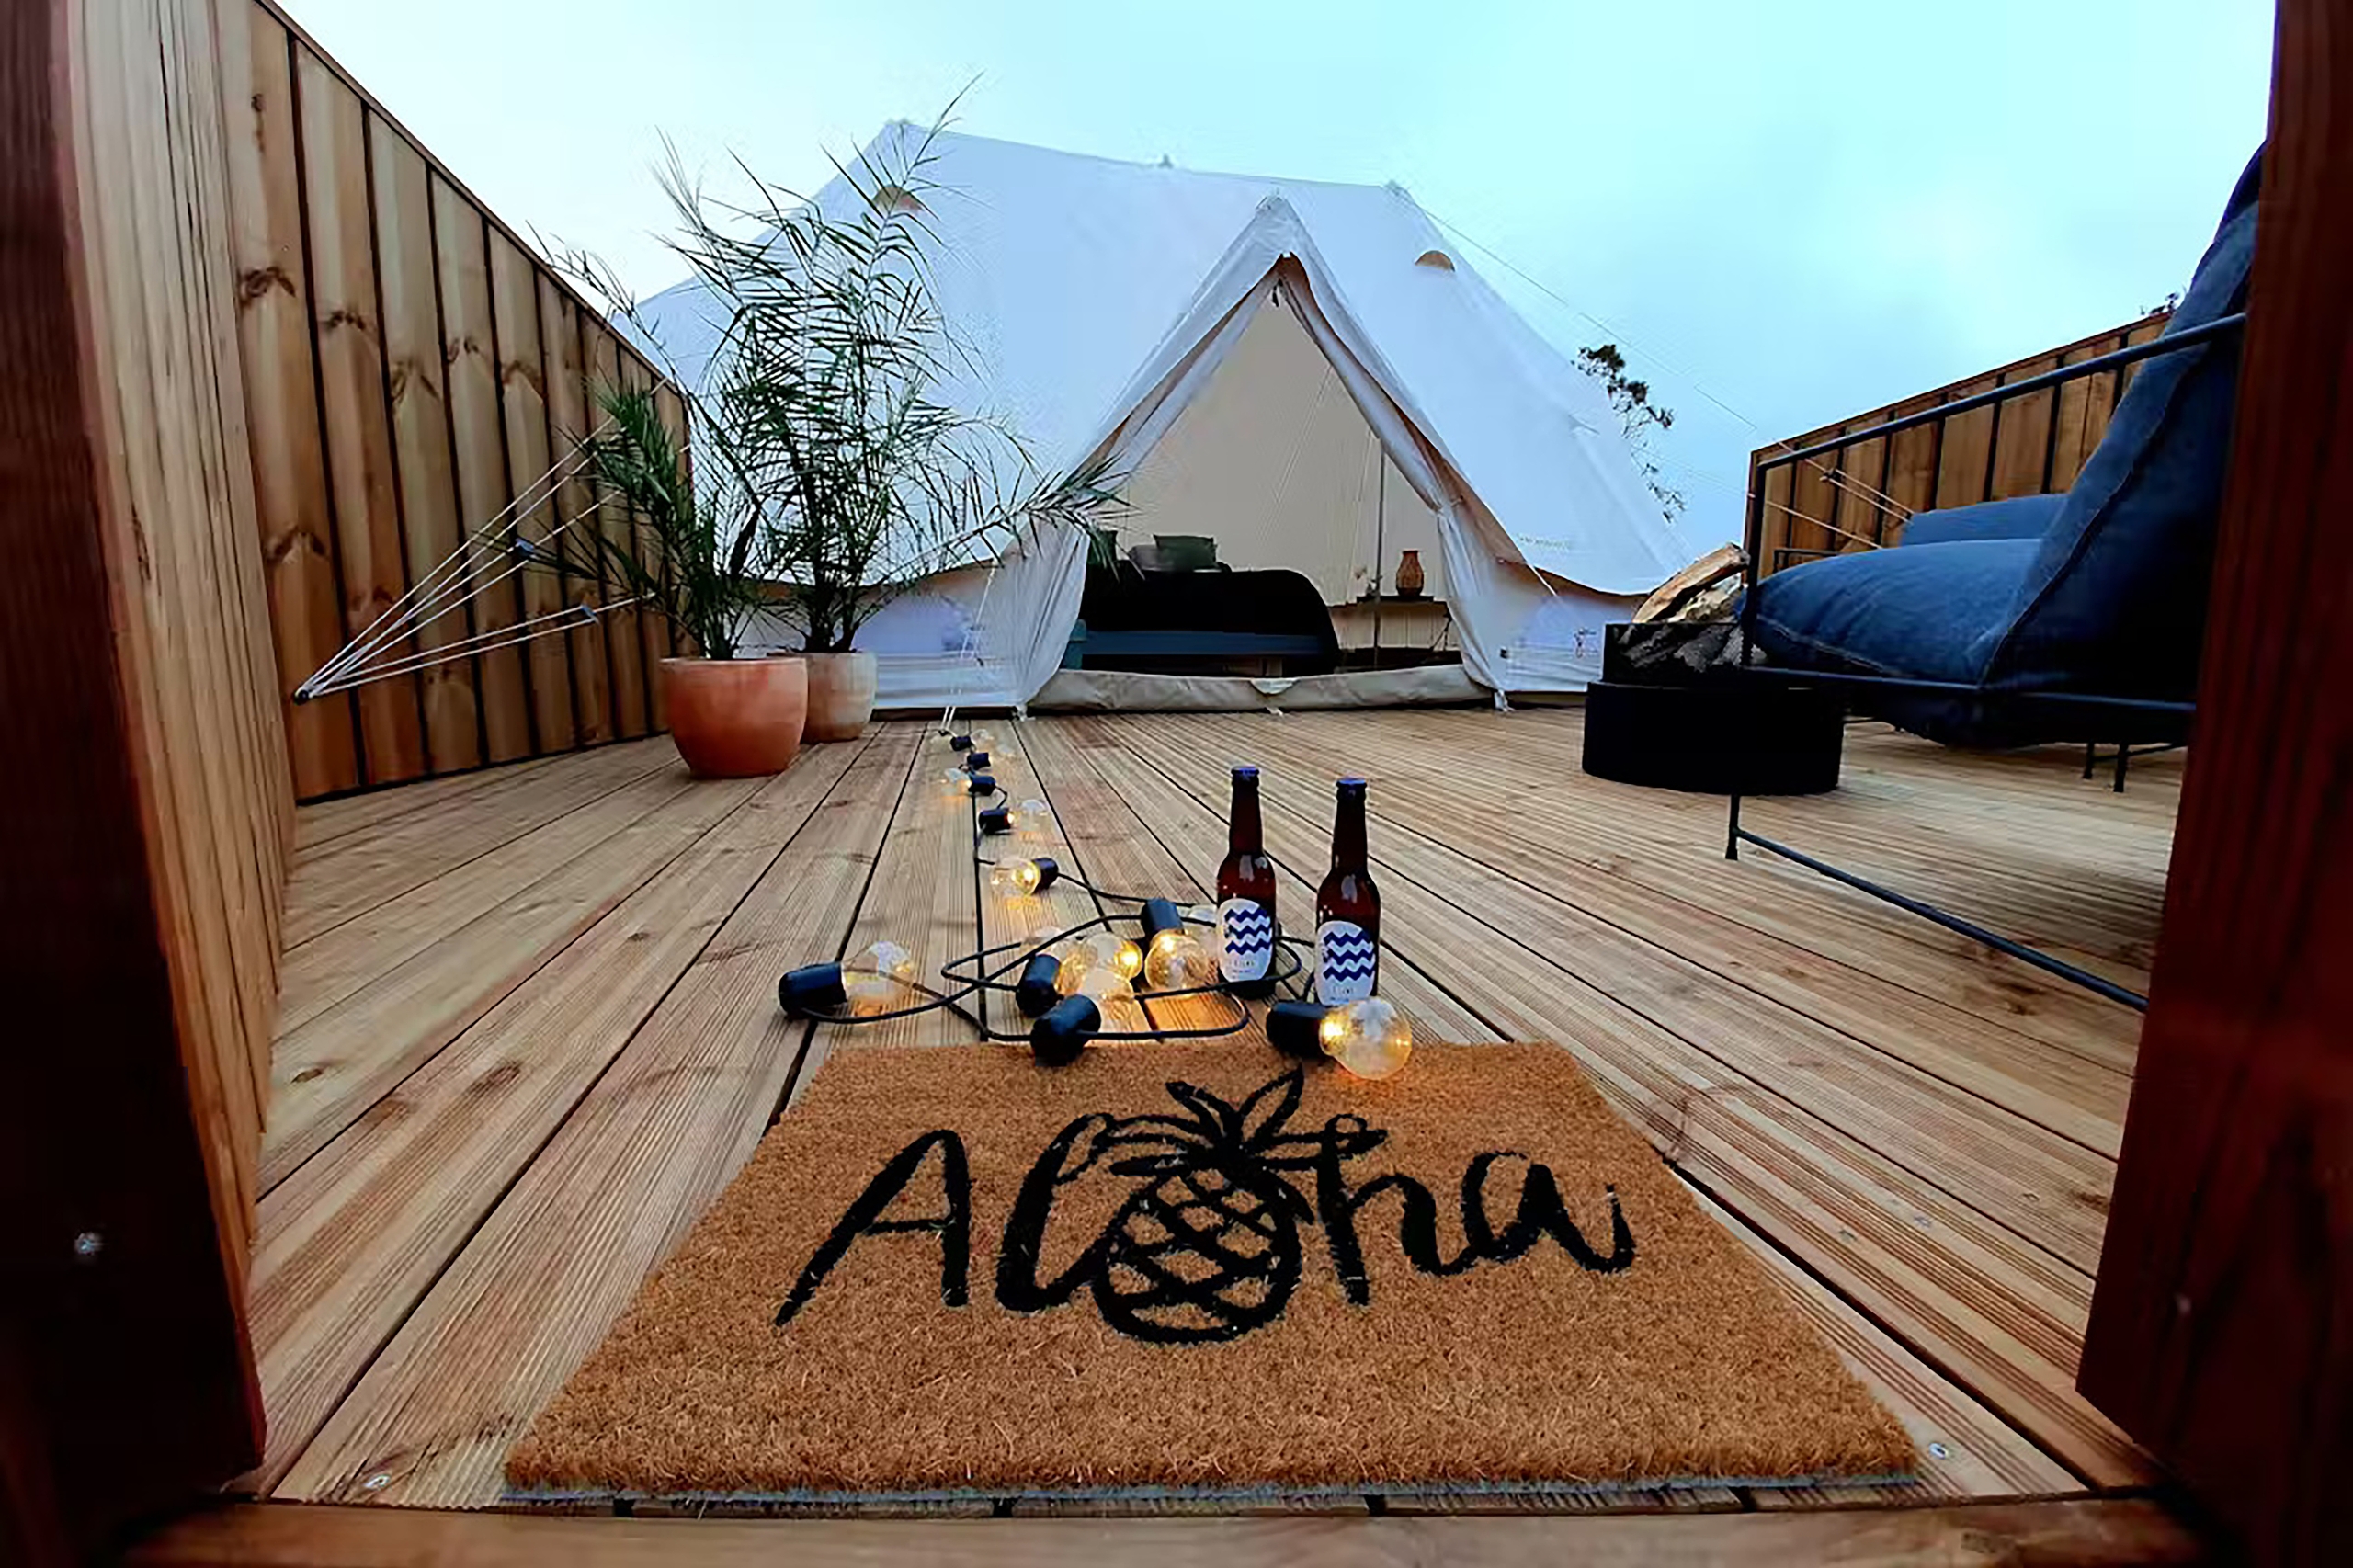 The chic glamping tents even have their own wooden deck. 